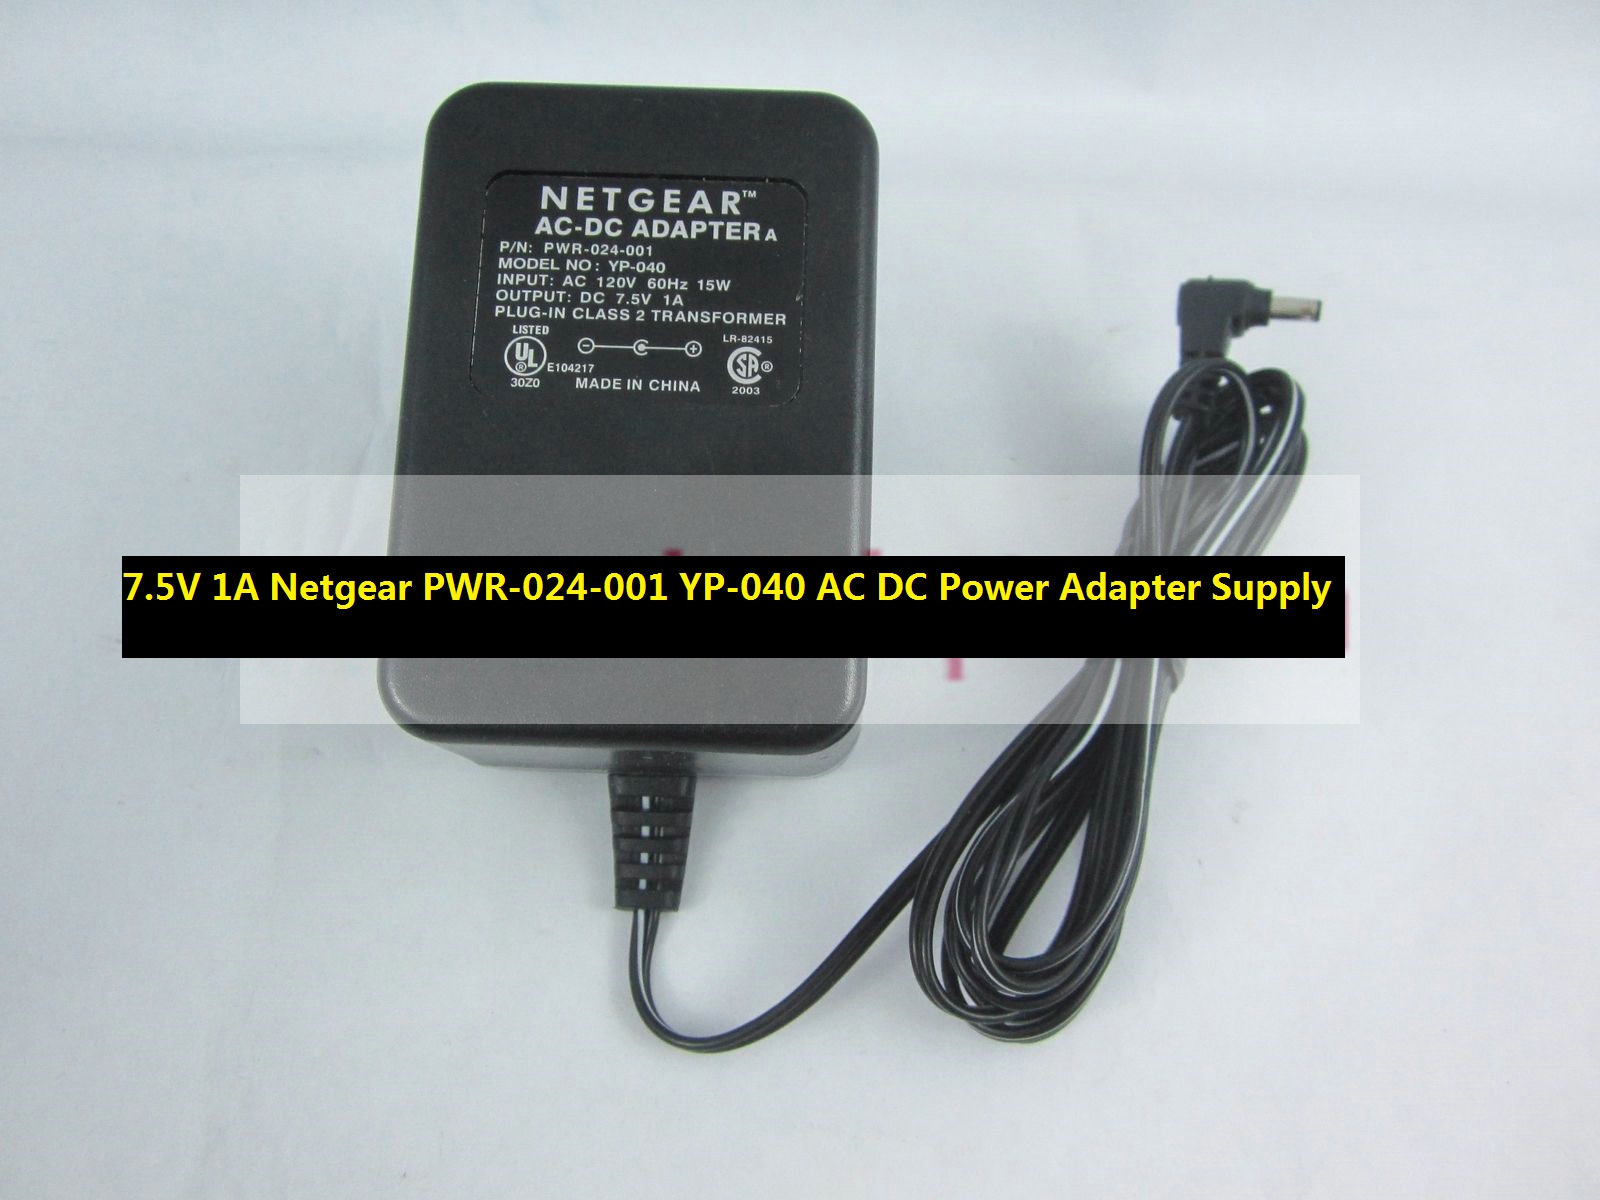 *Brand NEW* 7.5V 1A Netgear PWR-024-001 YP-040 AC DC Power Adapter Supply - Click Image to Close